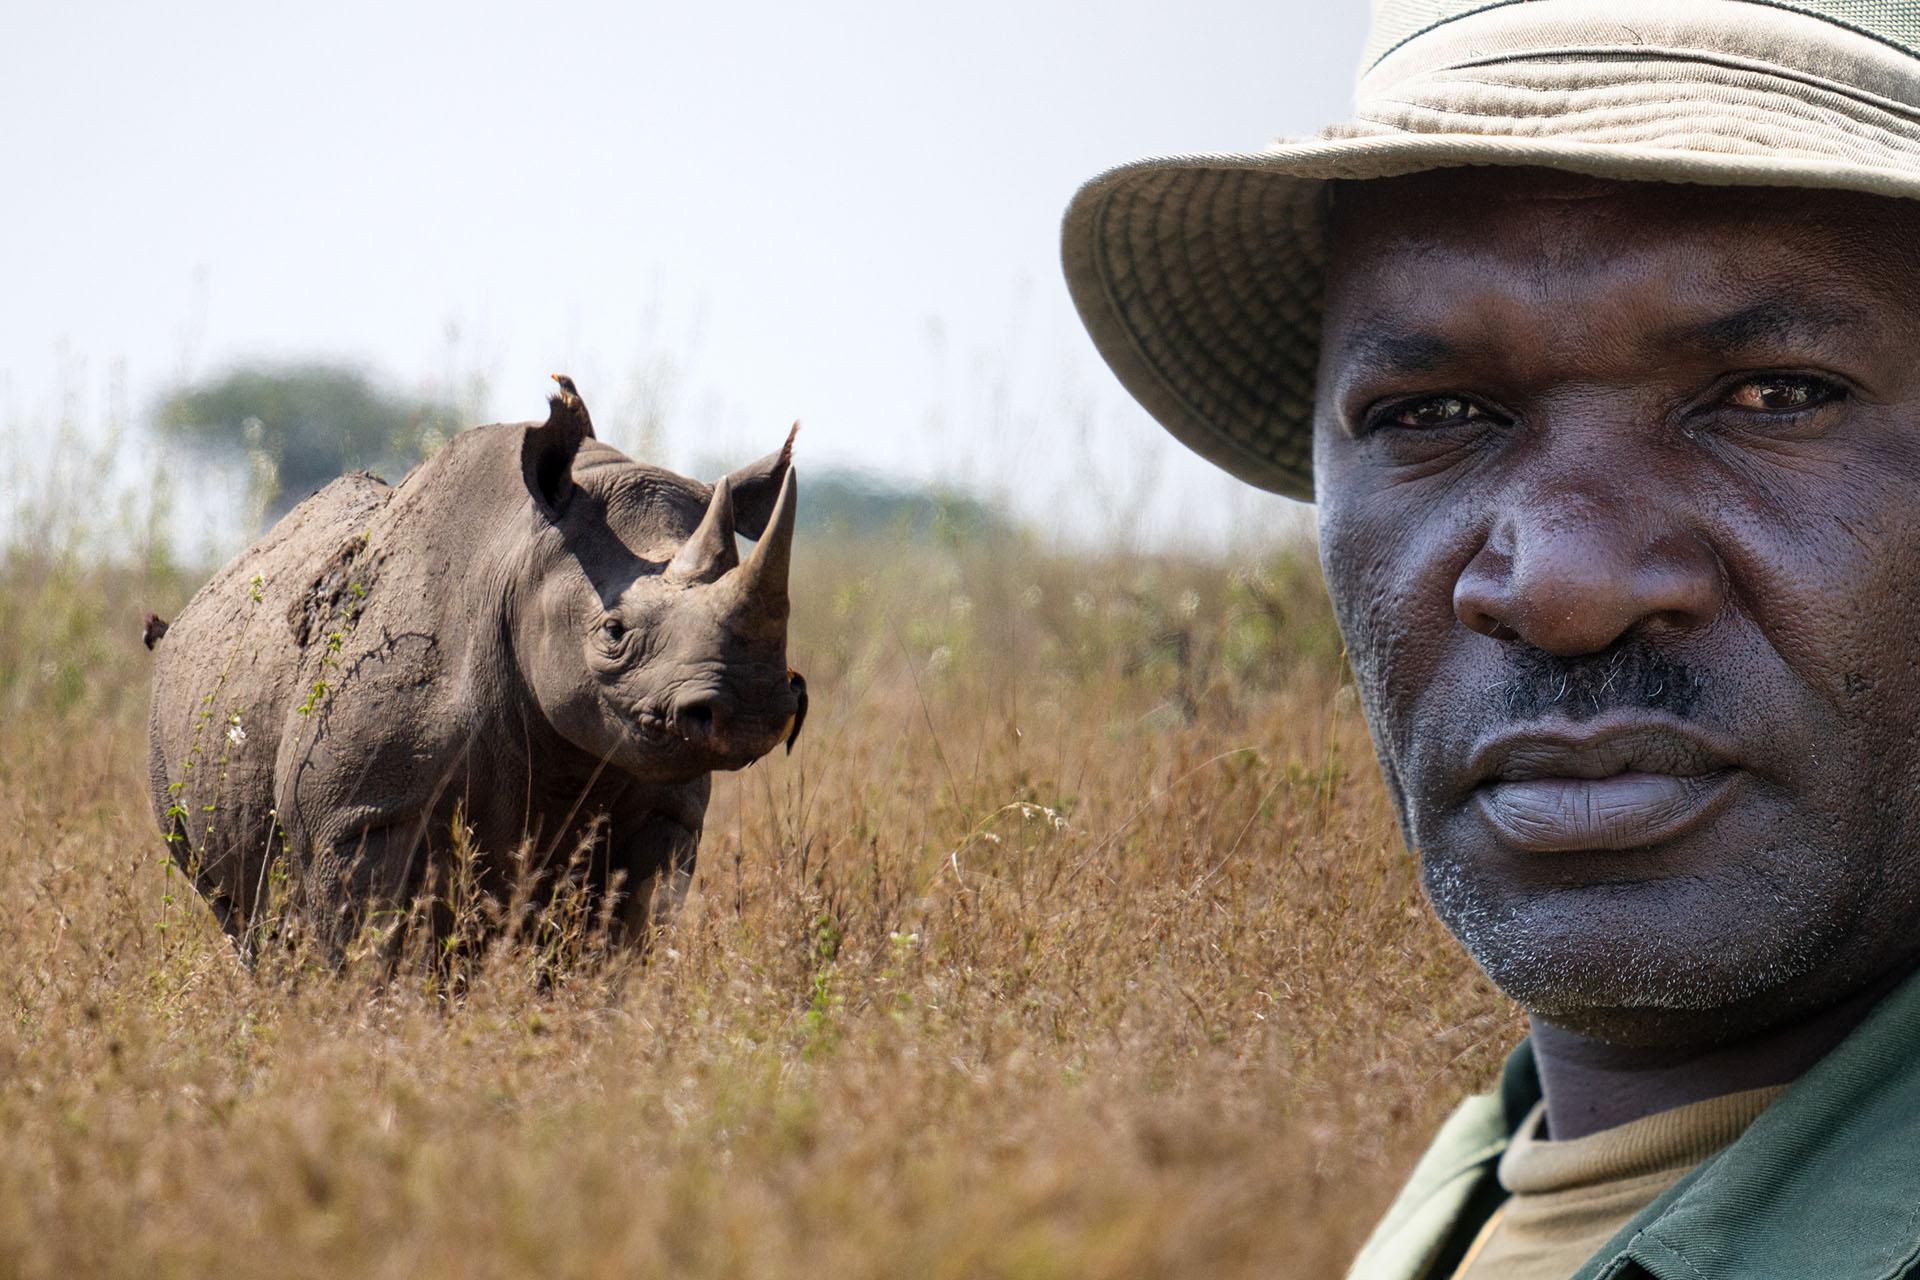 Tanapa established the first rhino conservation project in Moru Kopjes in southwestern Serengeti